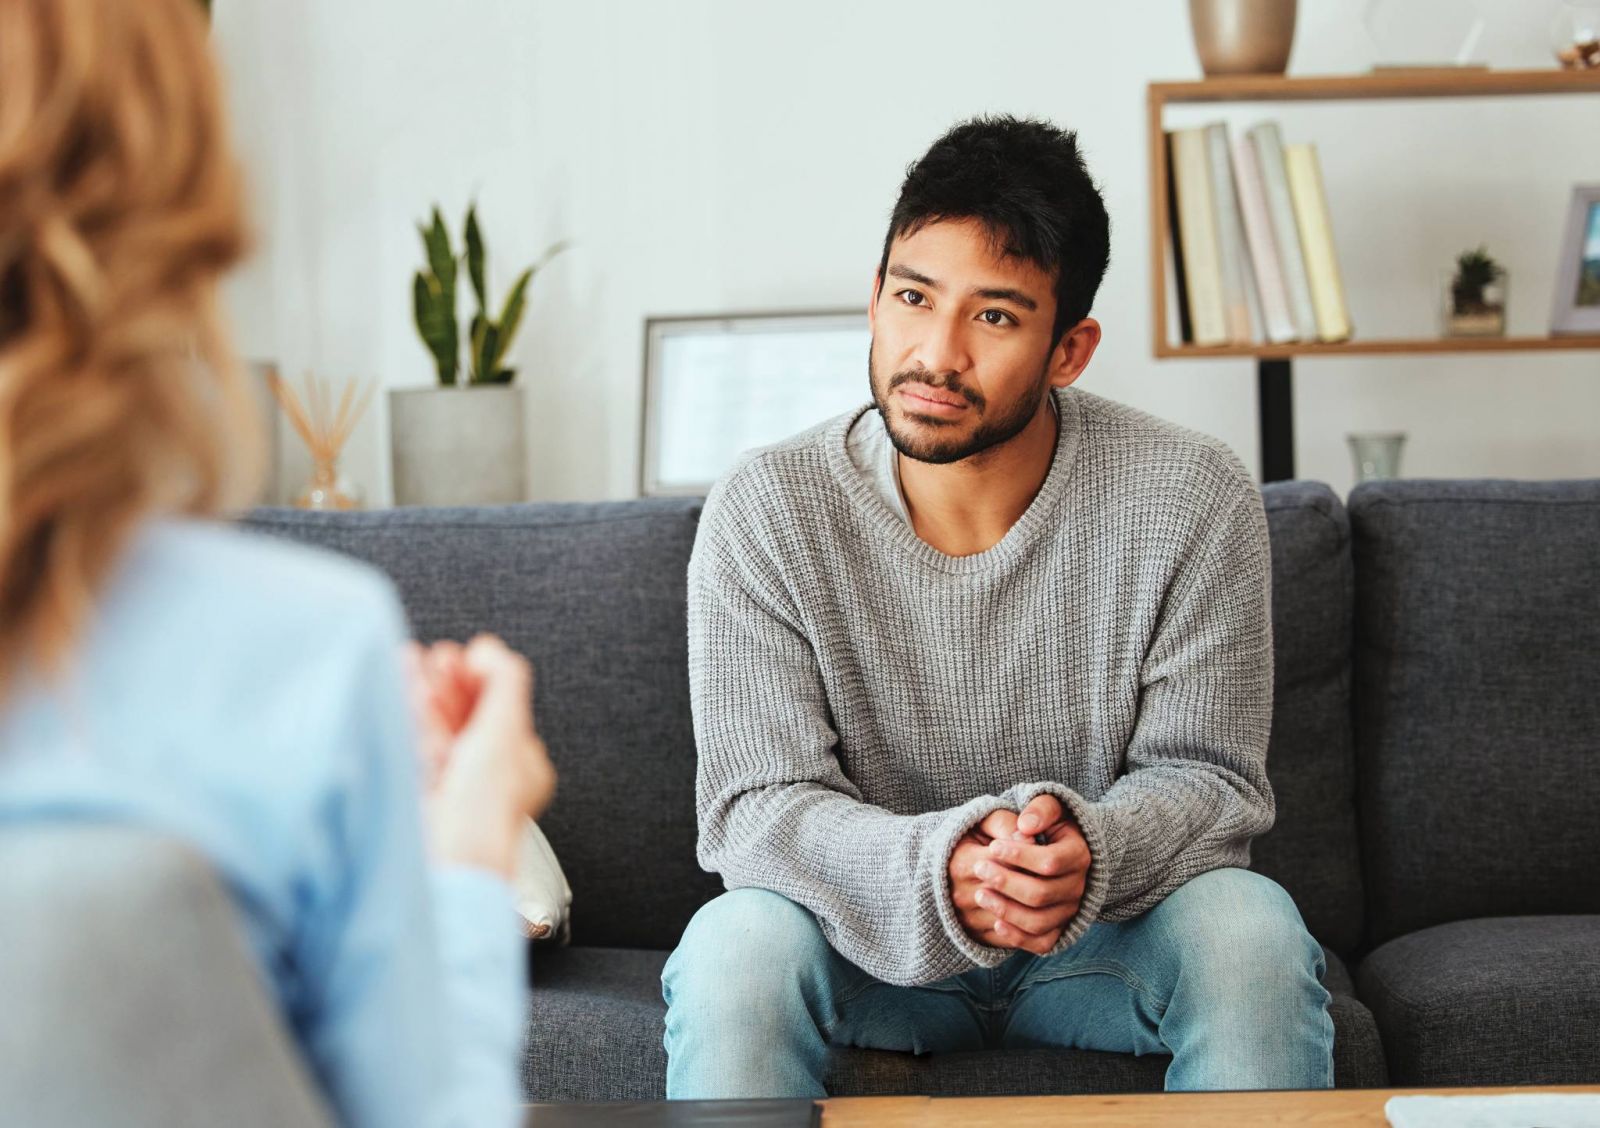 Client seeking help at the Melbourne Counselling Service